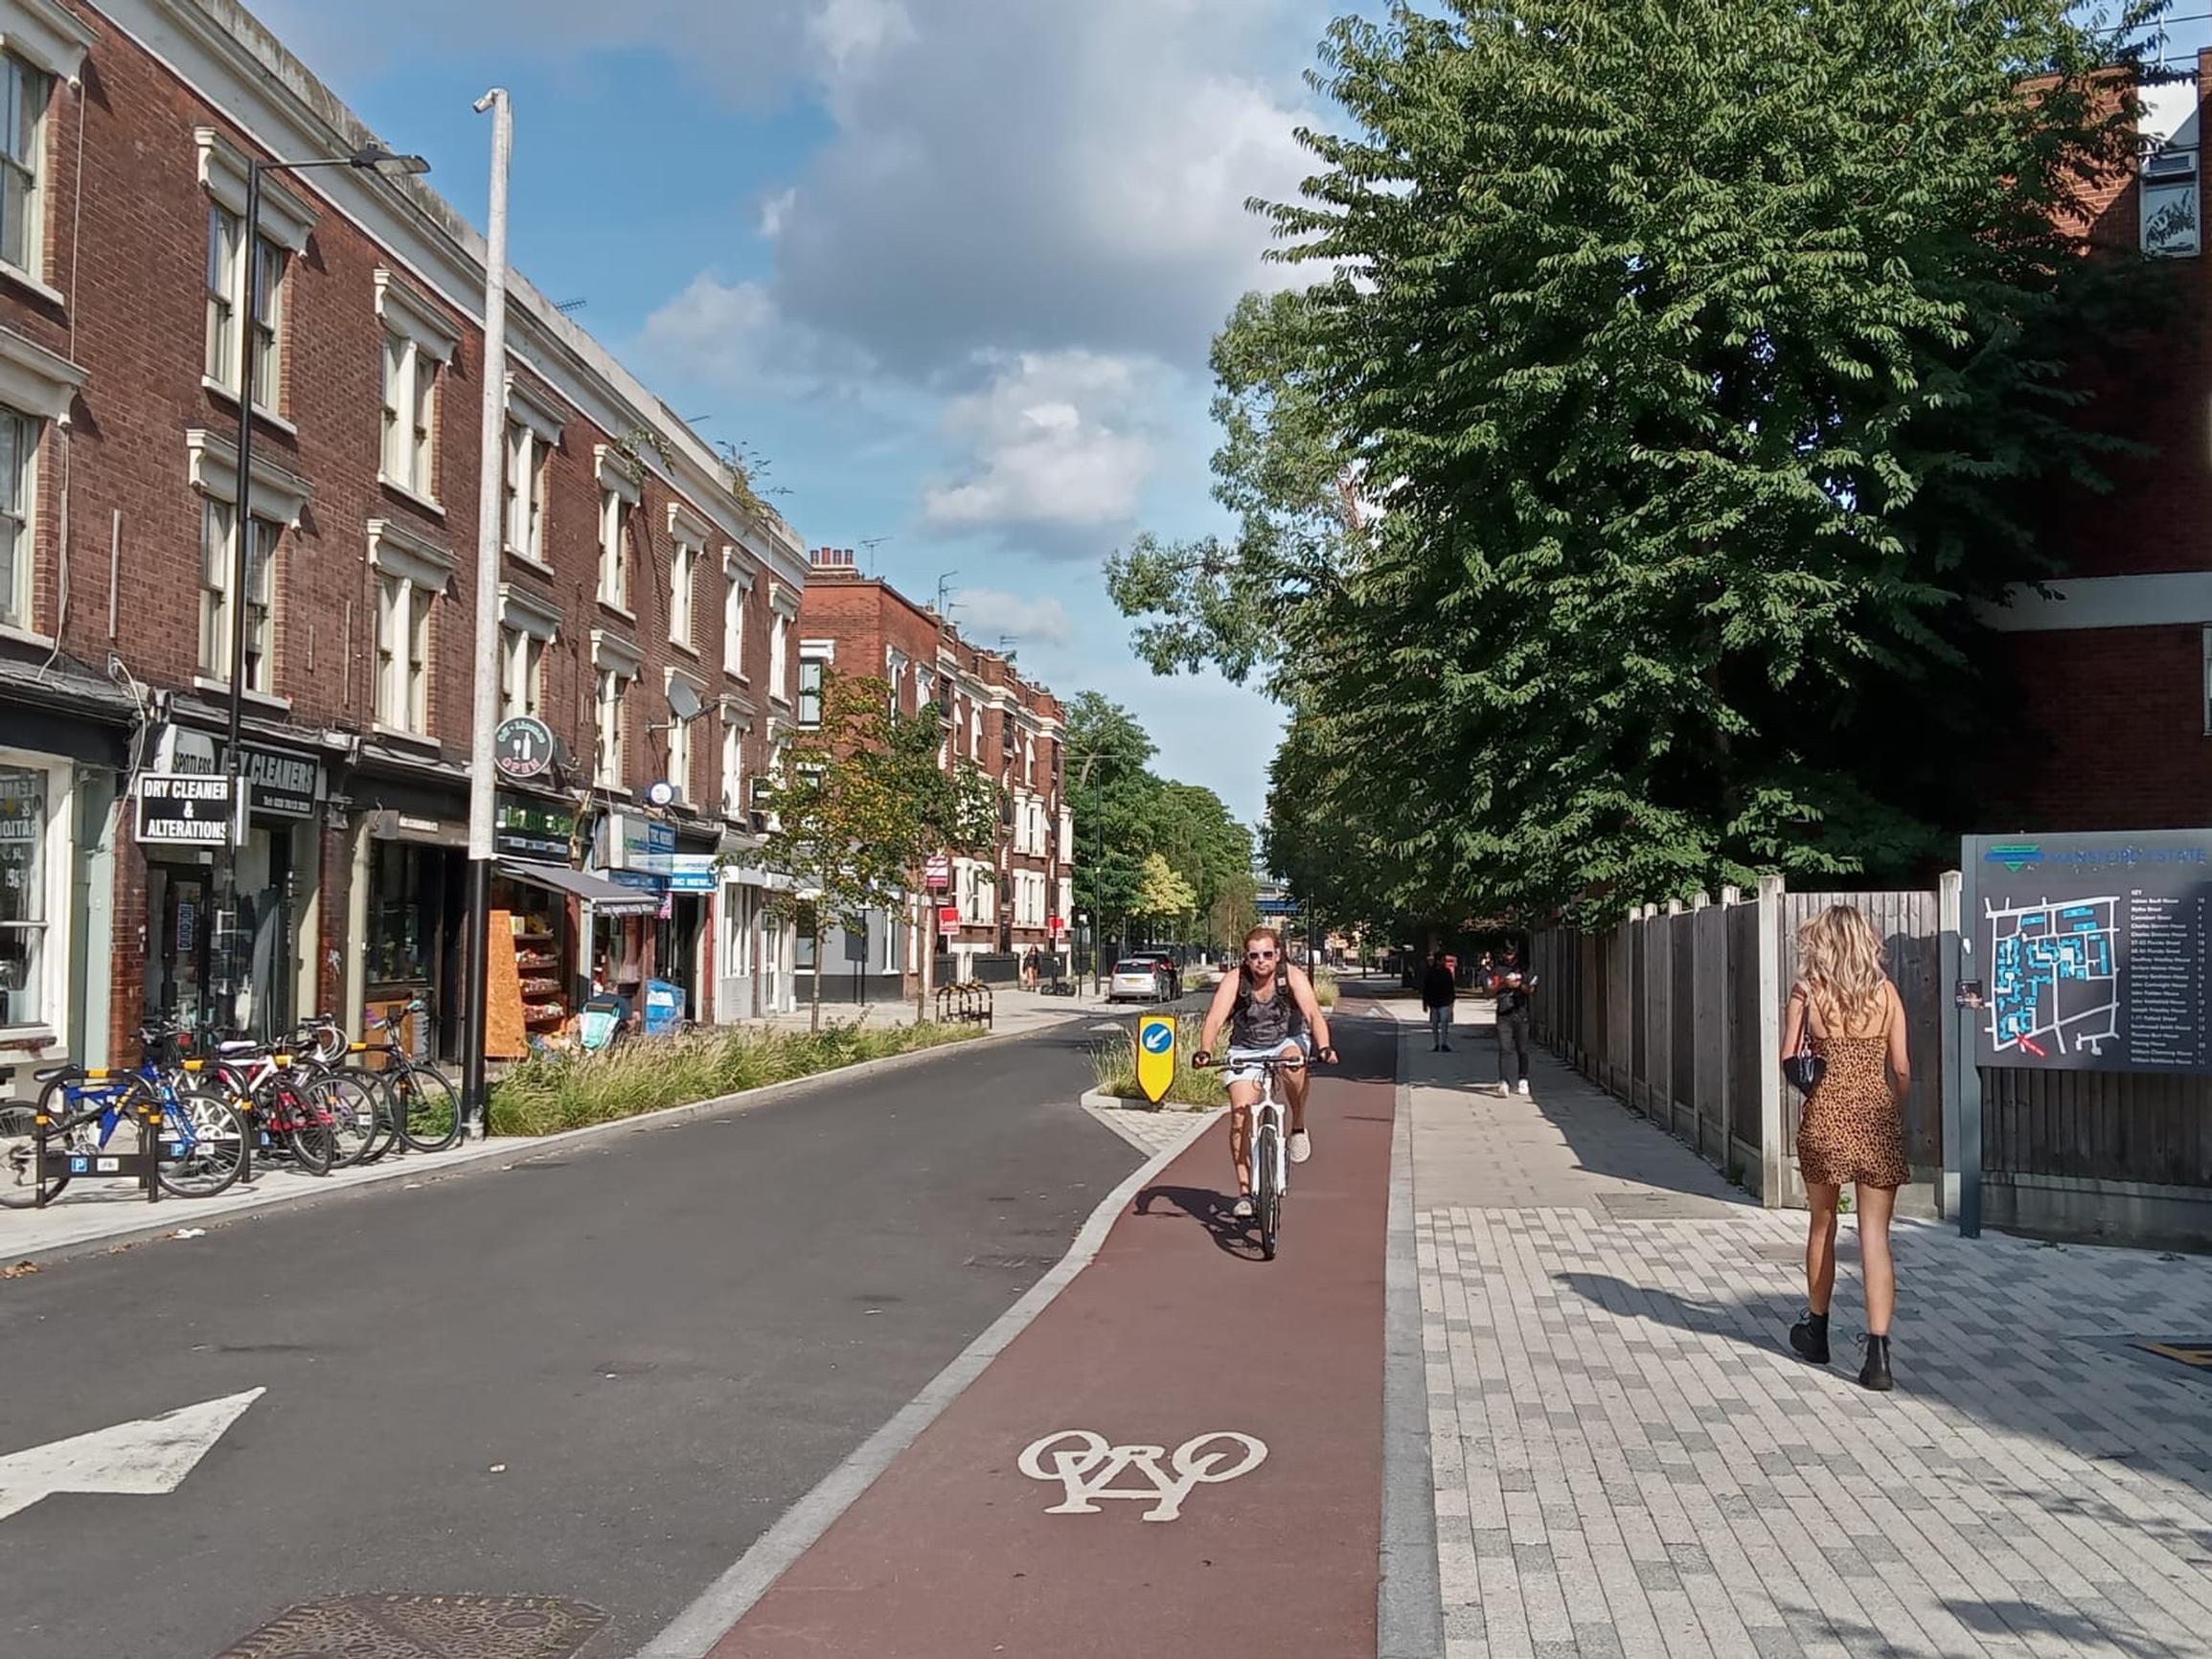 The council is considering proposals to remove the Old Bethnal Green Liveable Street, which was introduced in December 2021